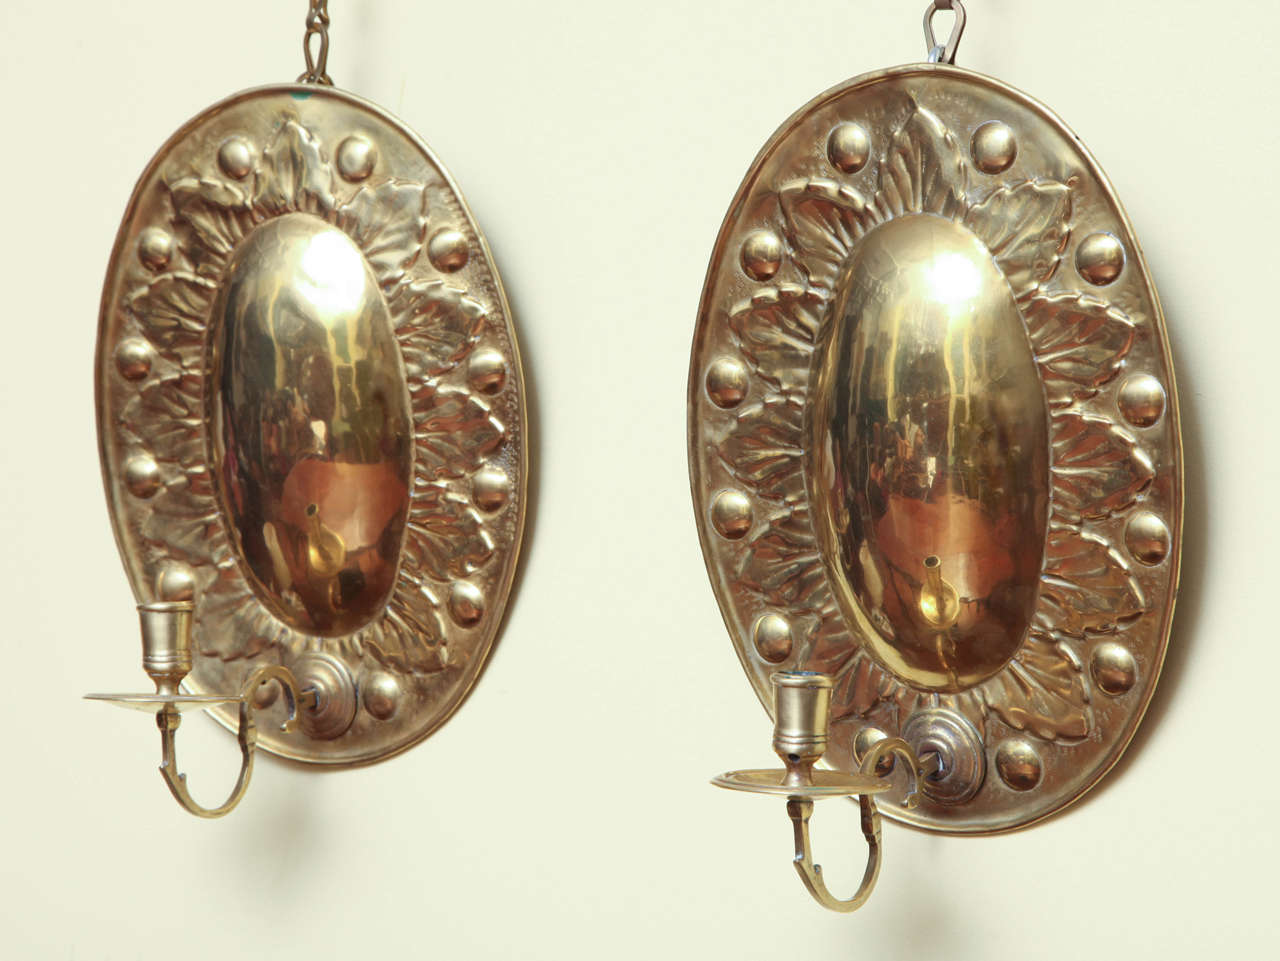 Dutch Very Fine and Rare Pair of Antique Oval Repousse Brass Sconces, circa 1700